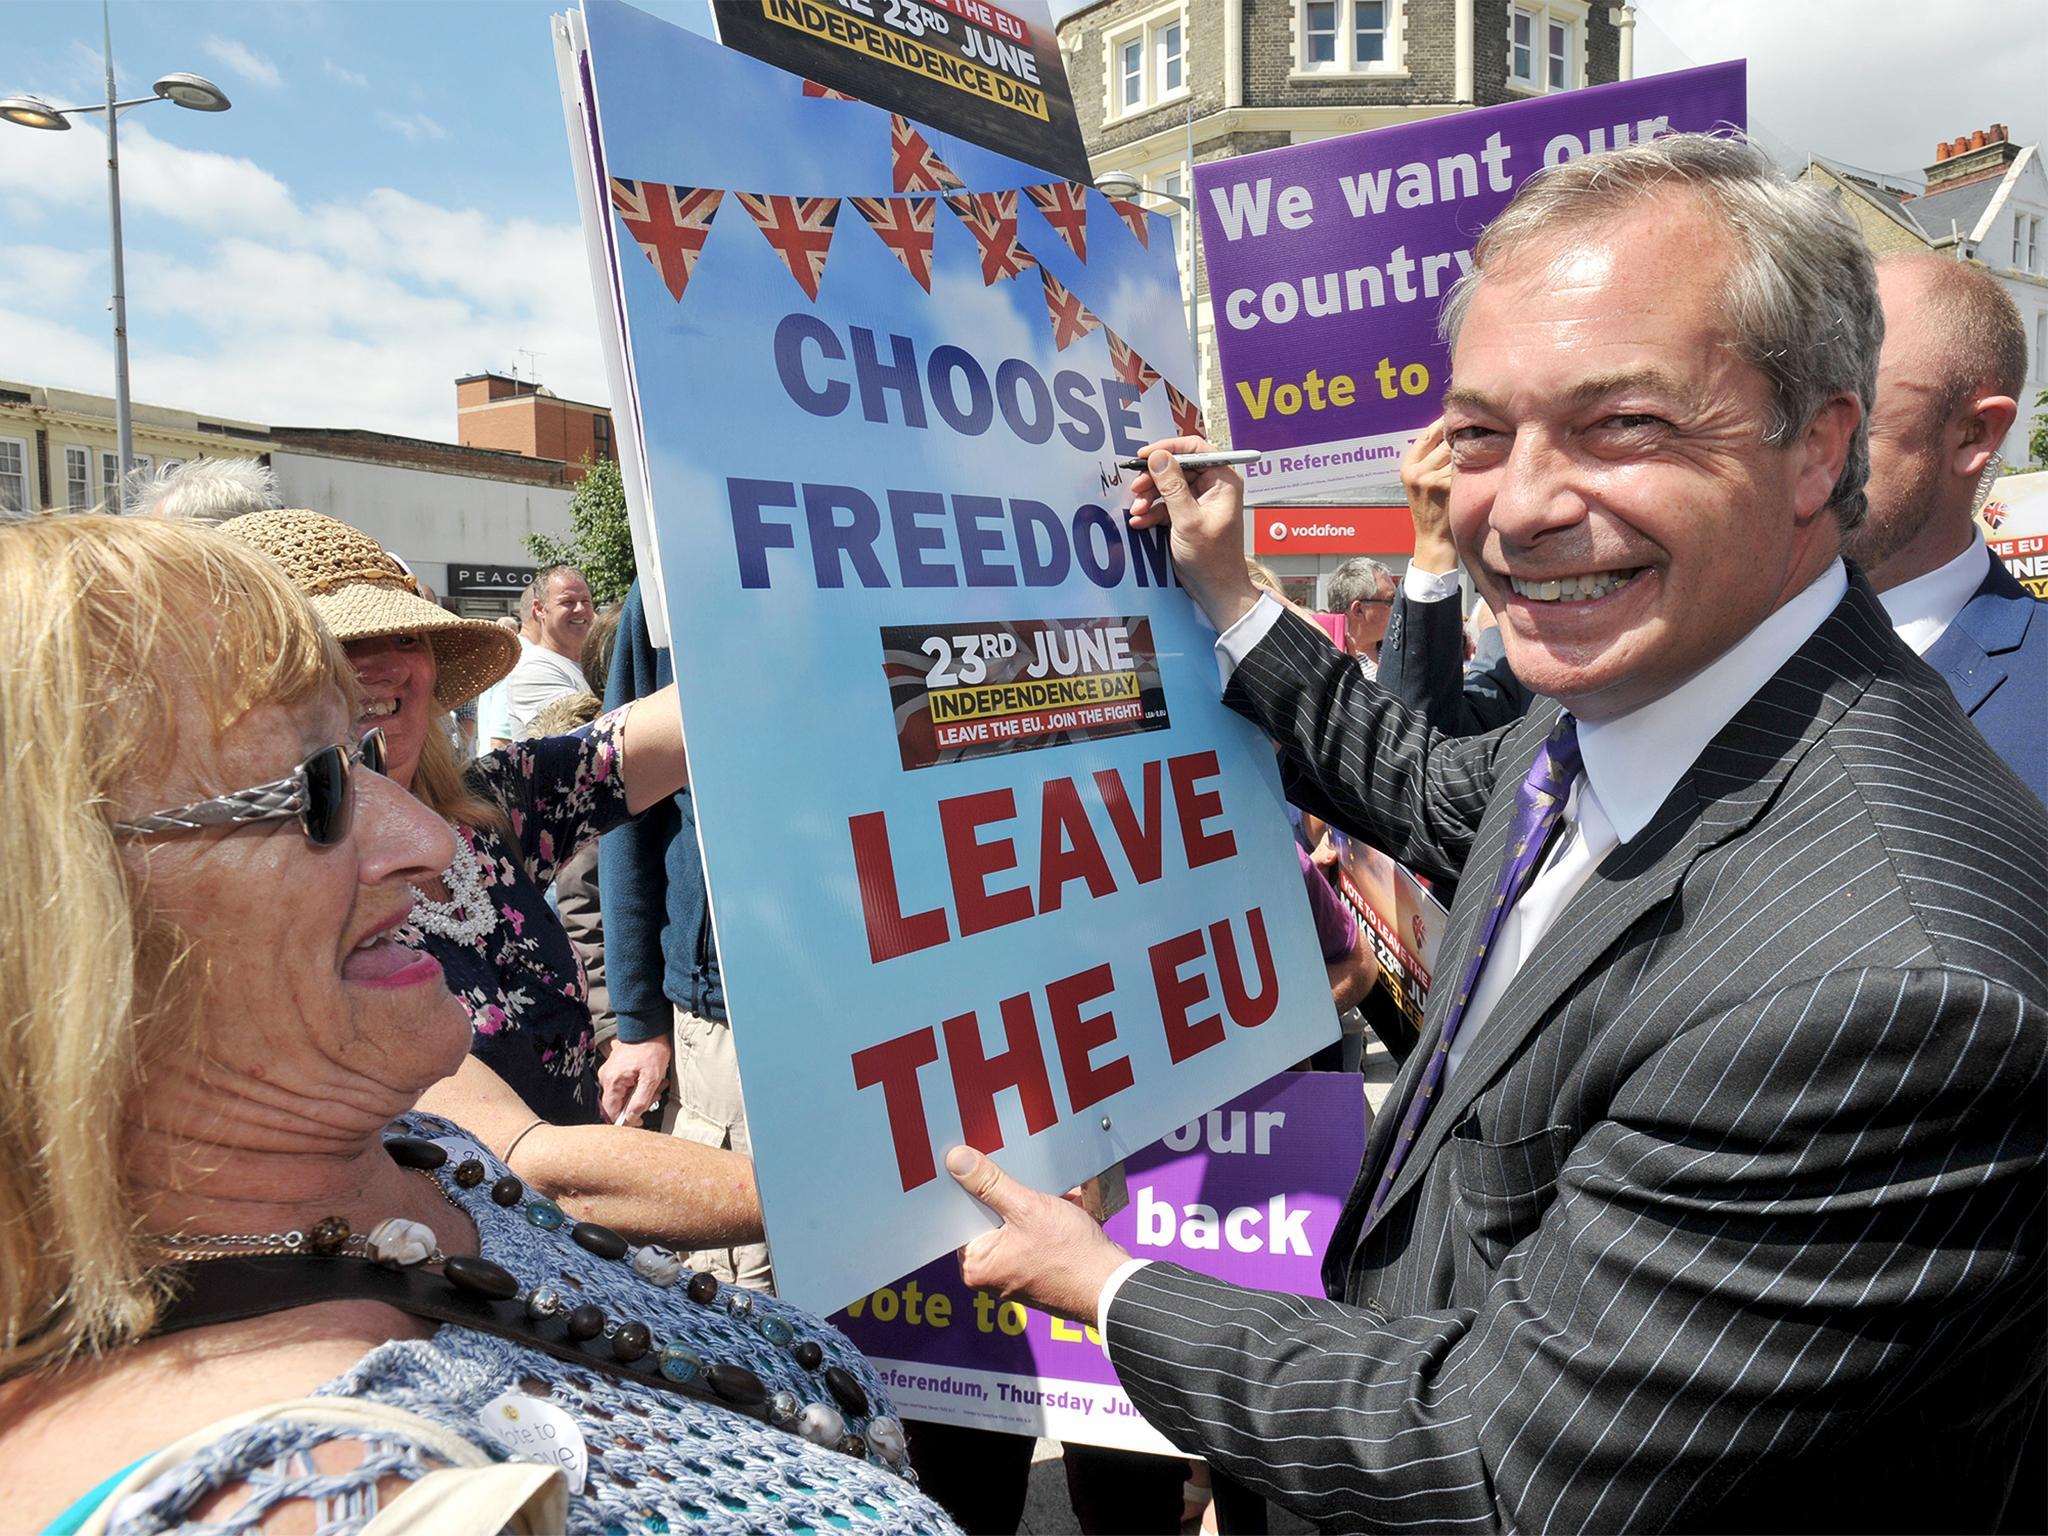 Once the referendum is over, there will be little point of Ukip and its Leader Nigel Farage